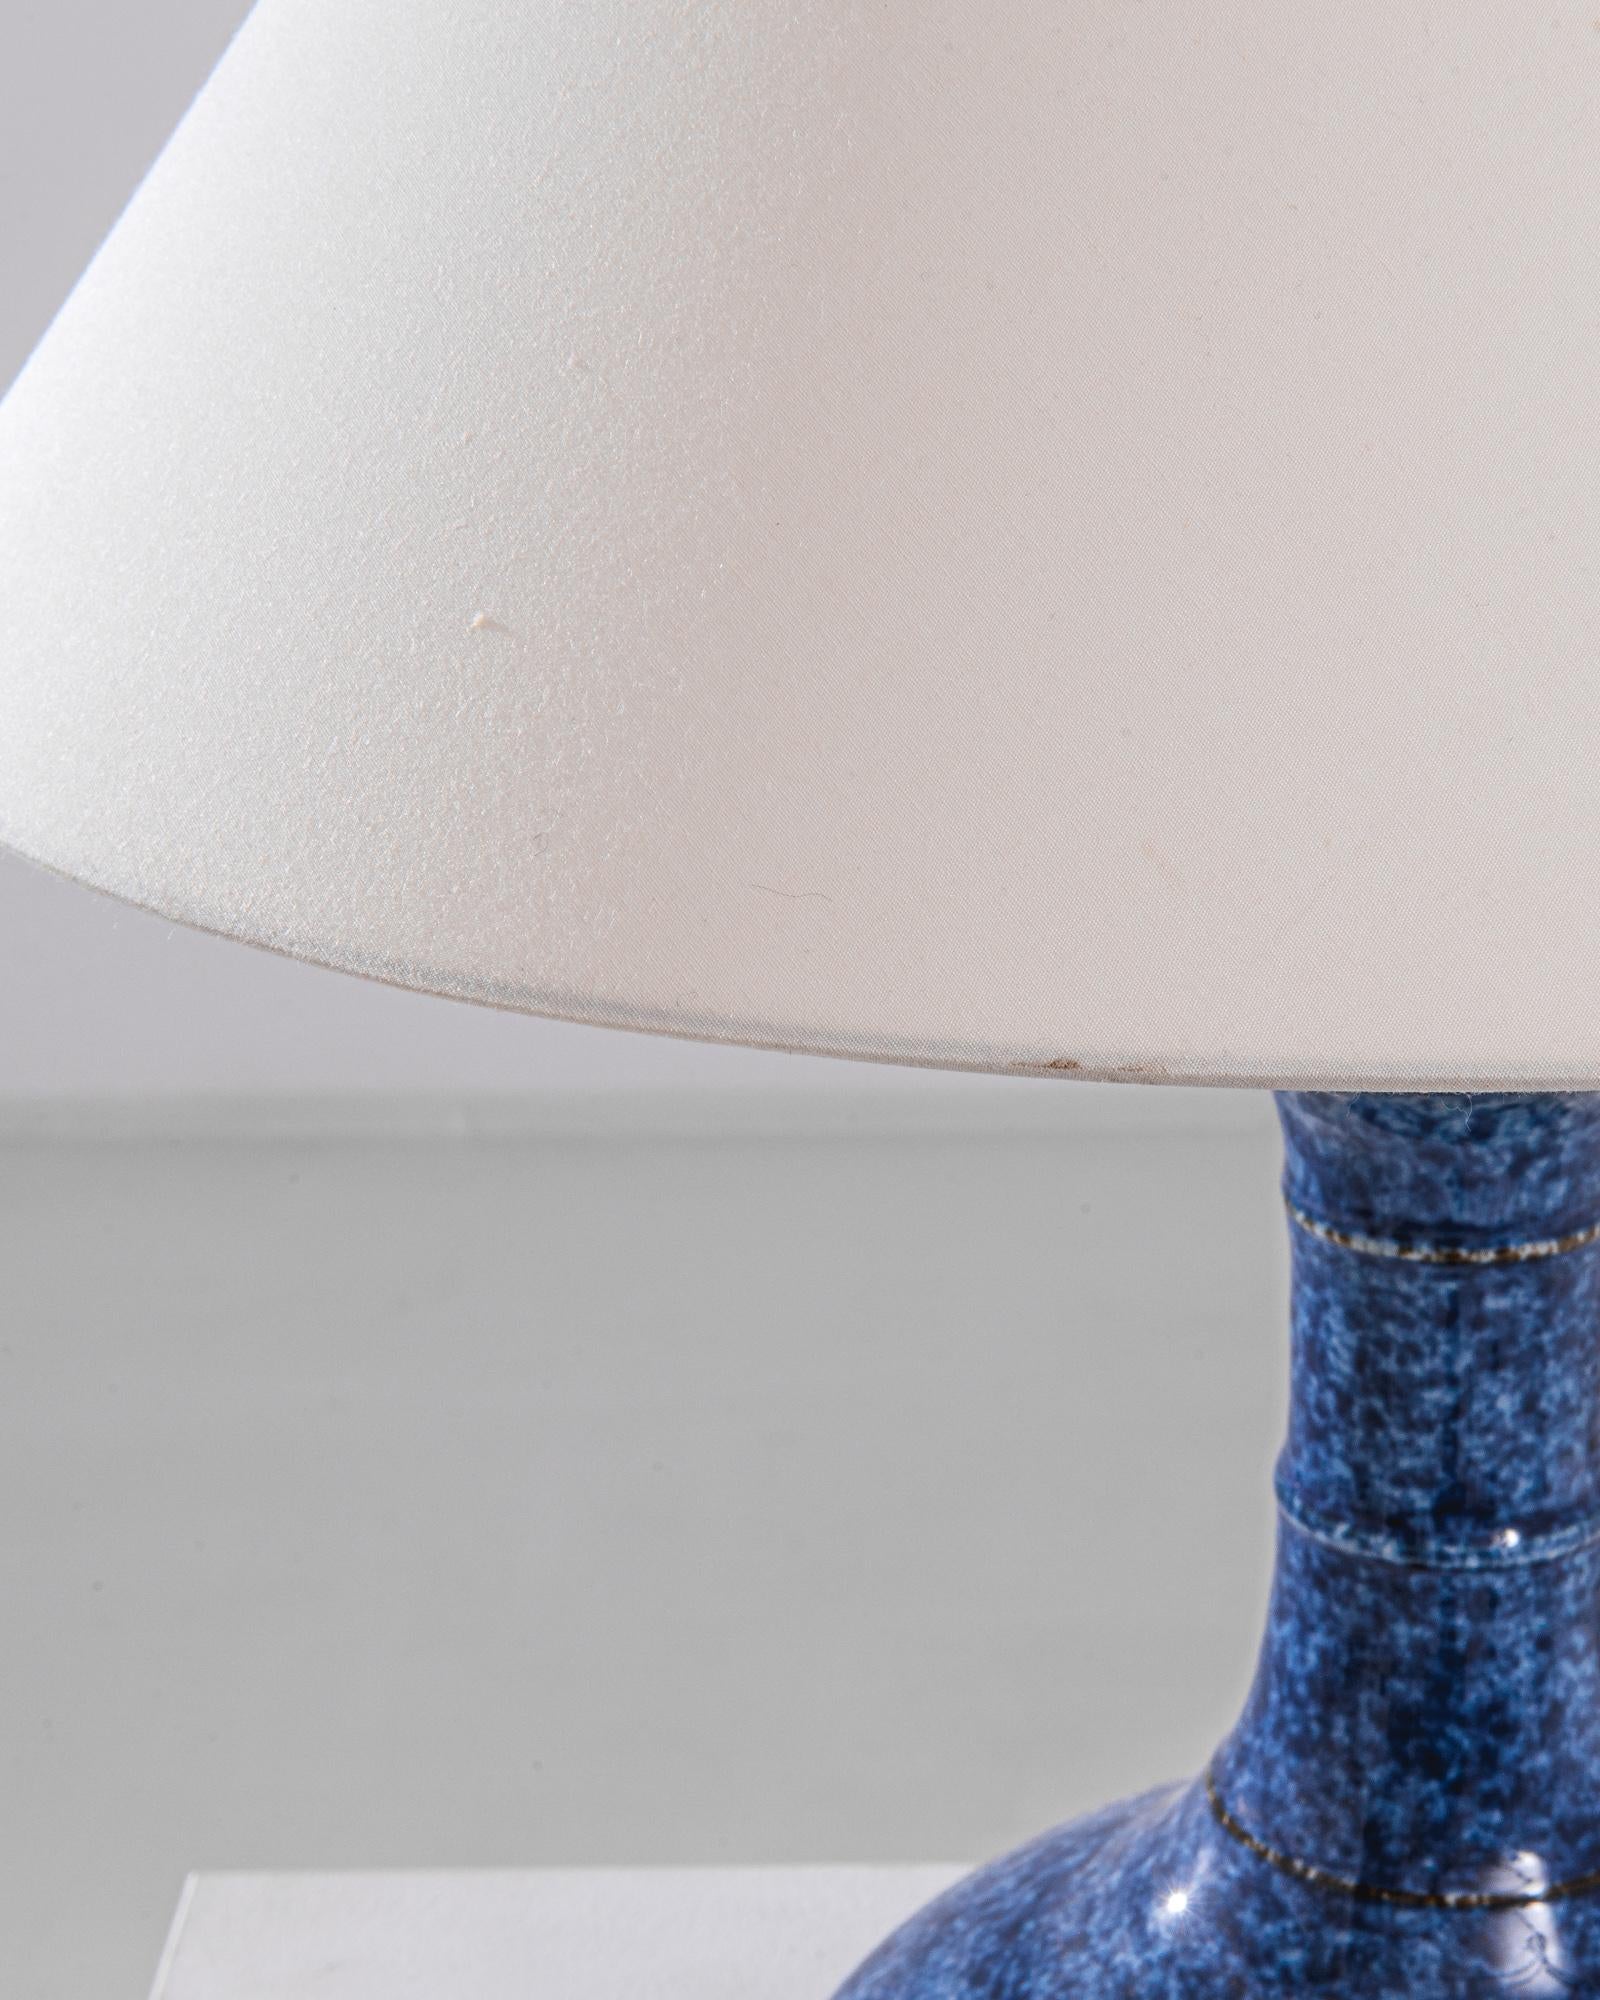 An extraordinary piece to inspire your collection. This vintage Chinese “garlic shape” vase has been adapted into a beautiful table lamp. Polished brass meets the speckled white and blue glaze, enlightening your space with an uncompromising